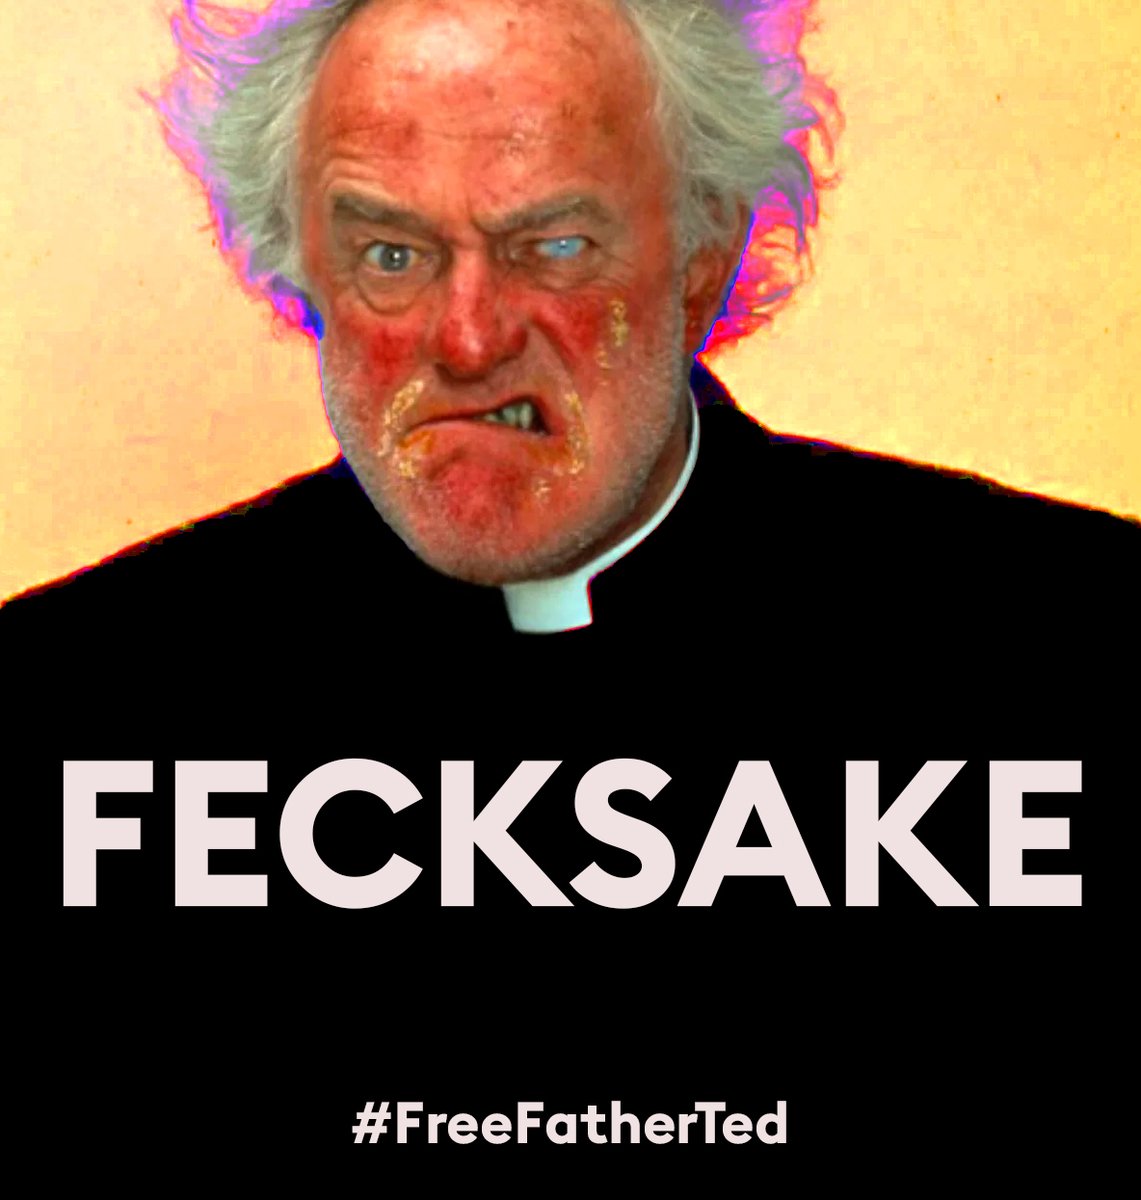 Hey @HatTrickProd @JimmyMulville  & Sonia Friedman
Now we've established who was on the wrong side of history all along, isn't it time you apologised and let @Glinner have his musical back?

Just a thought.

Guys? Guys.... 

#FreeFatherTed #GlinnerWasRight